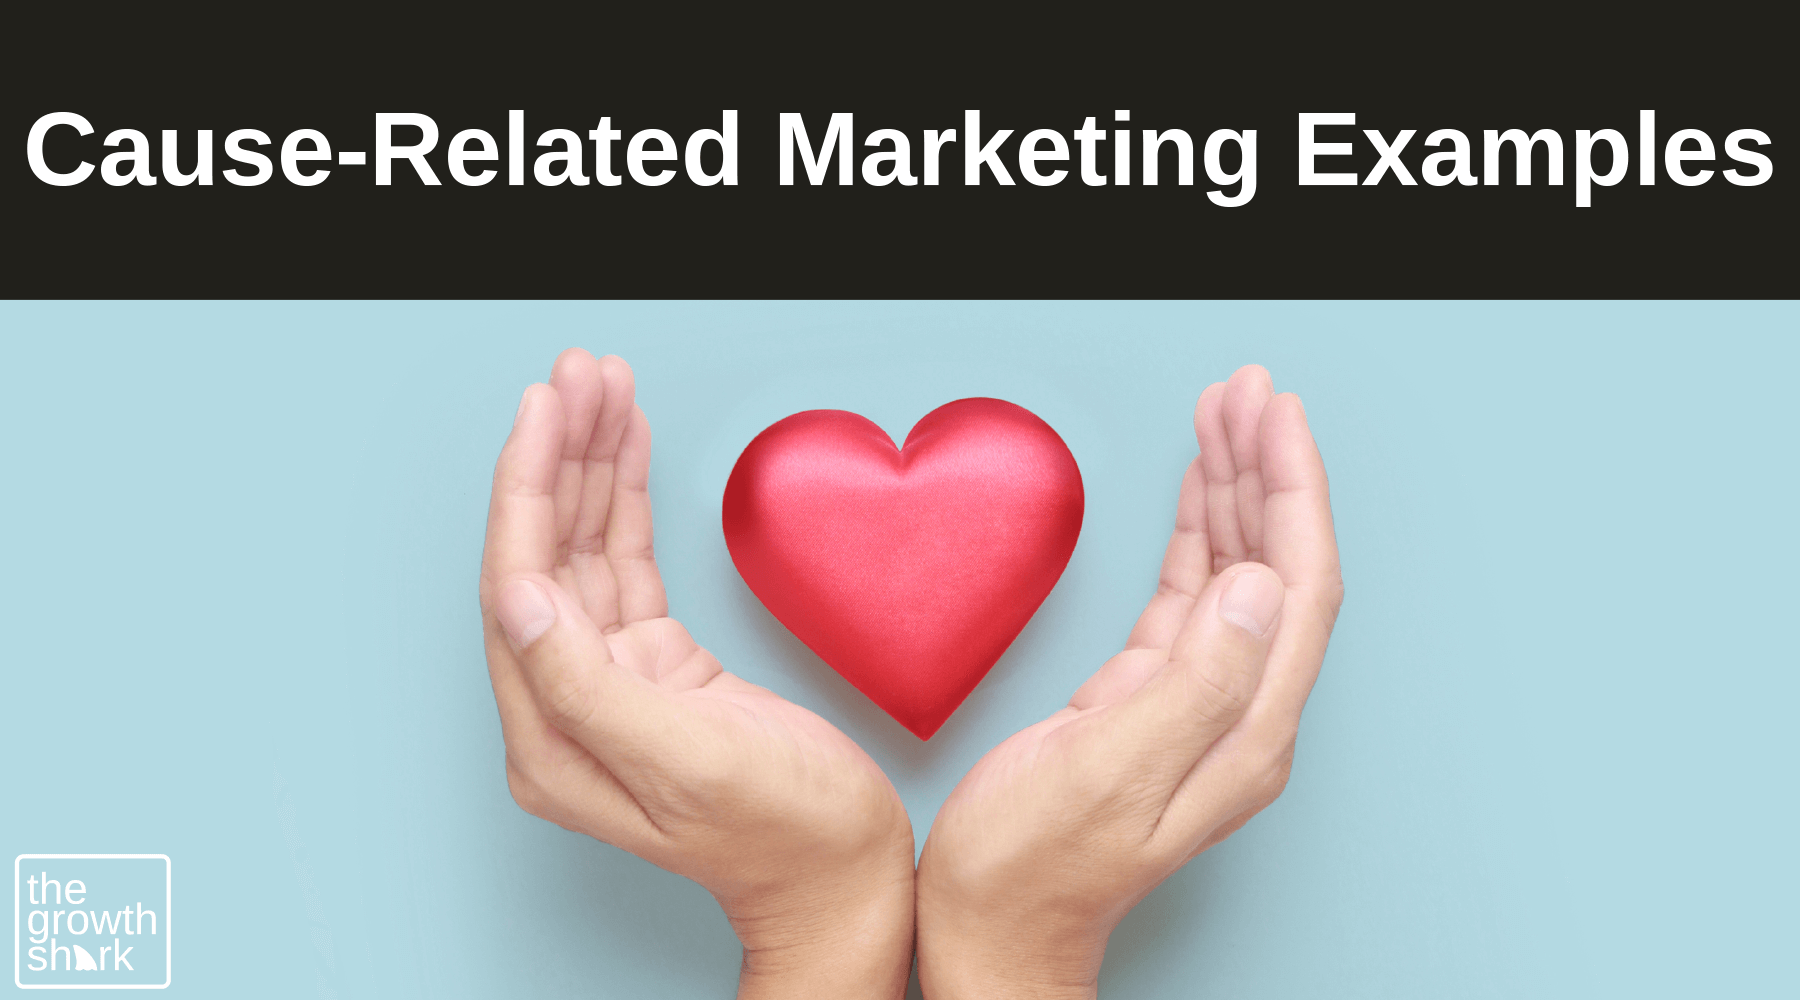 Here are great examples of Cause-Related Marketing that you can implement in your business